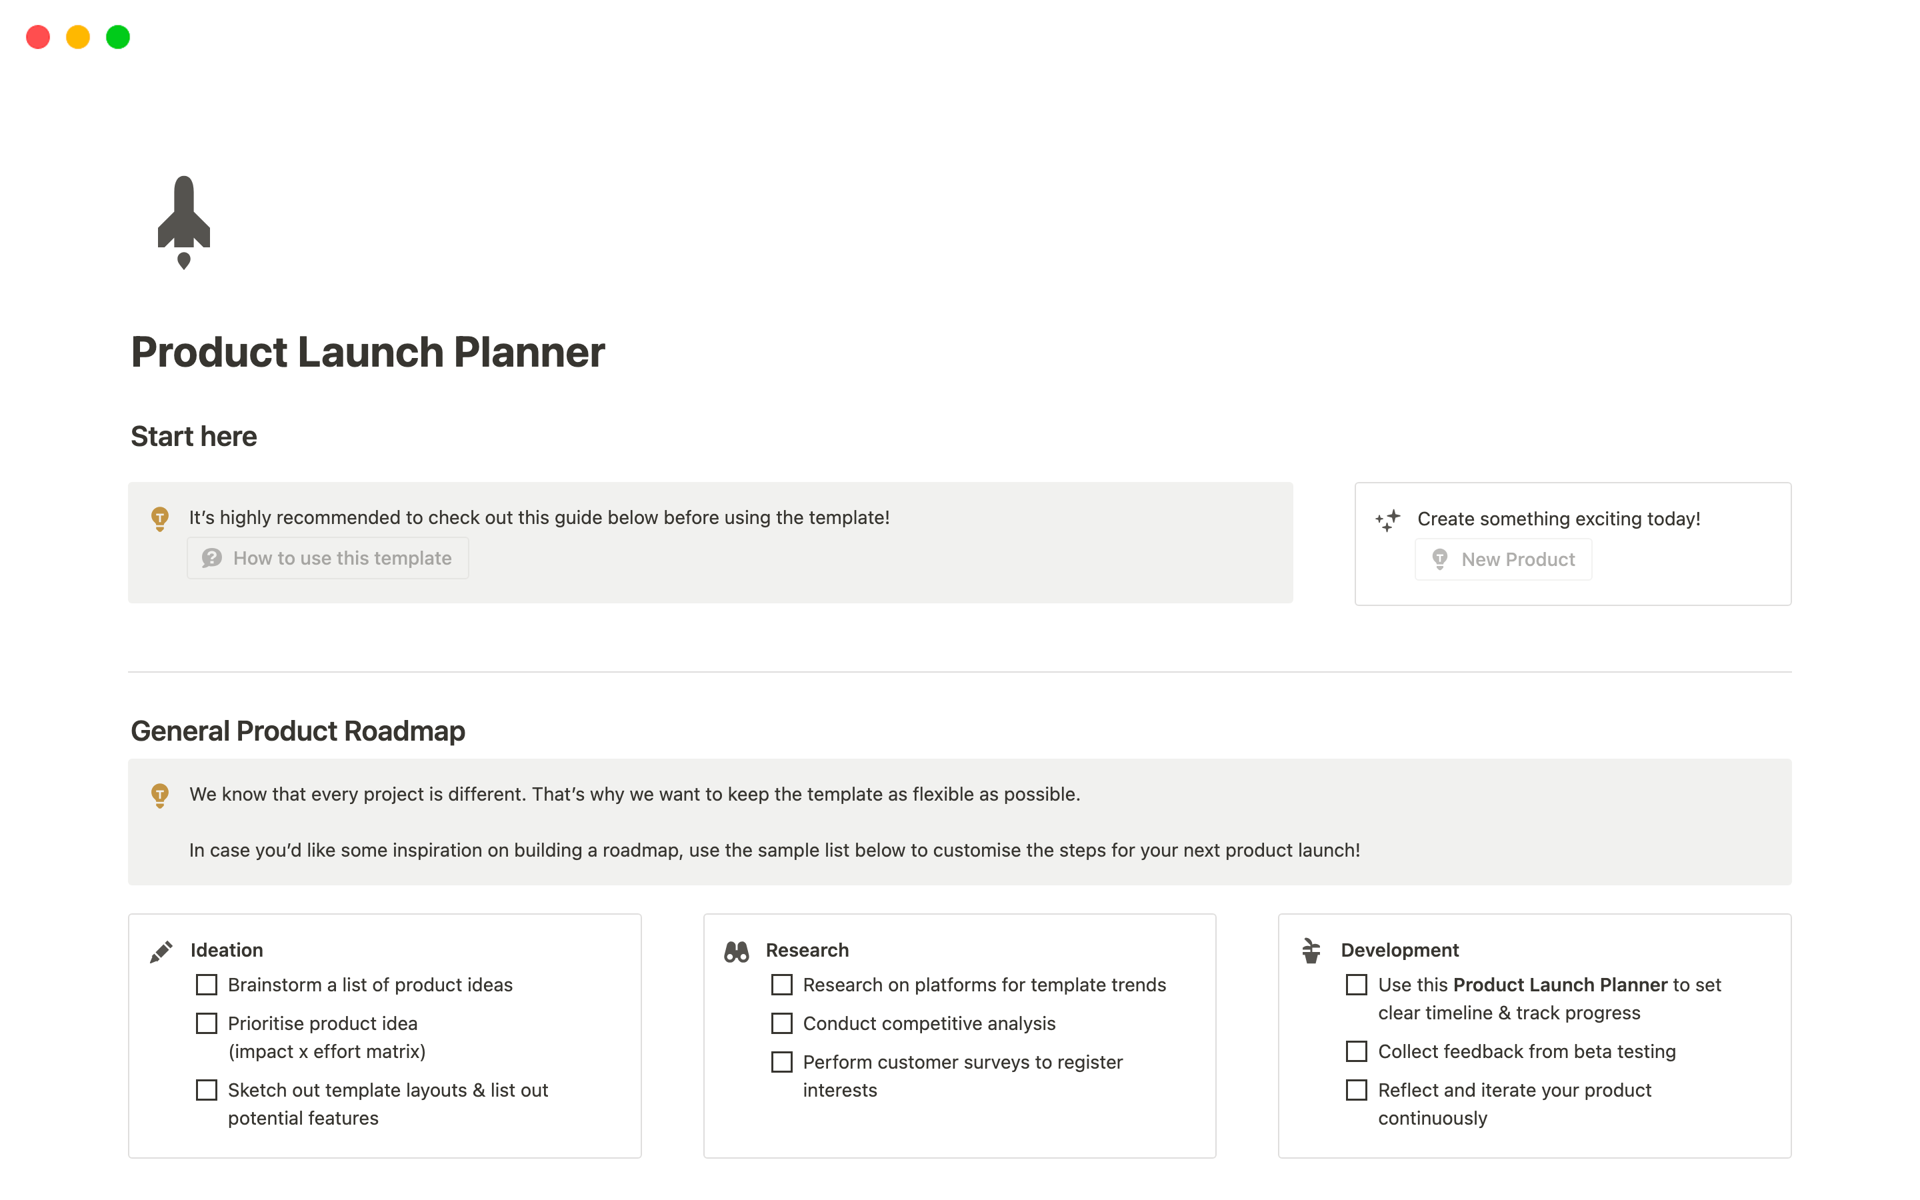 Screenshot of Top 10 Product Launch Plan Templates for Product Development Managers collection by Notion